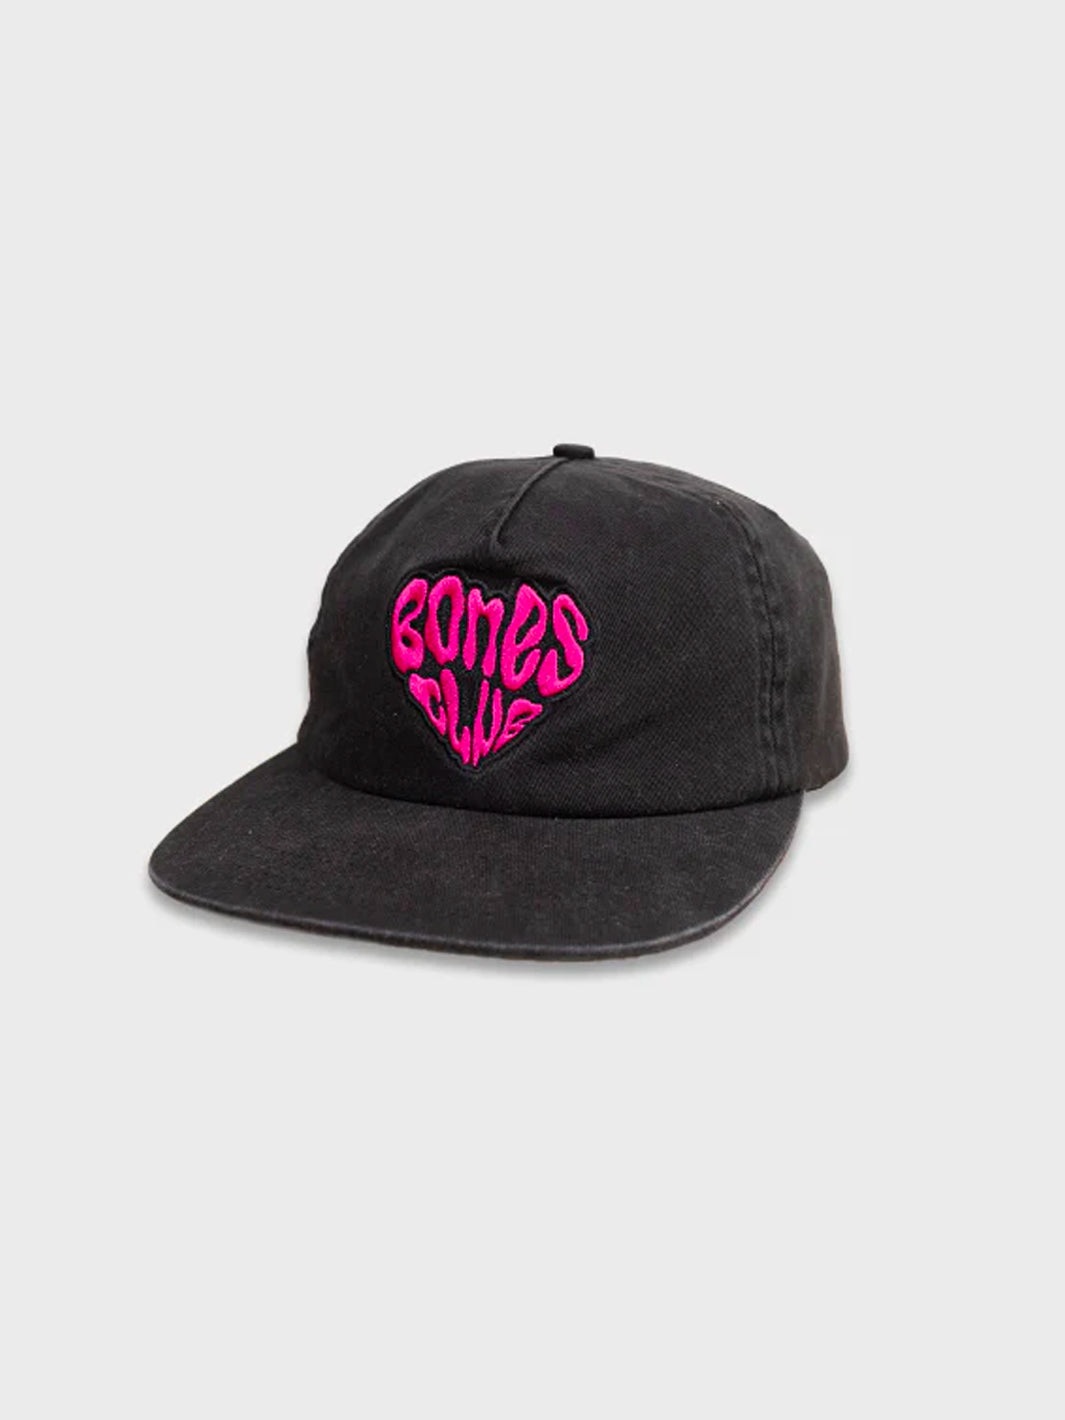 LOVERS CLUB UNSTRUCTURED CAP - BLACK